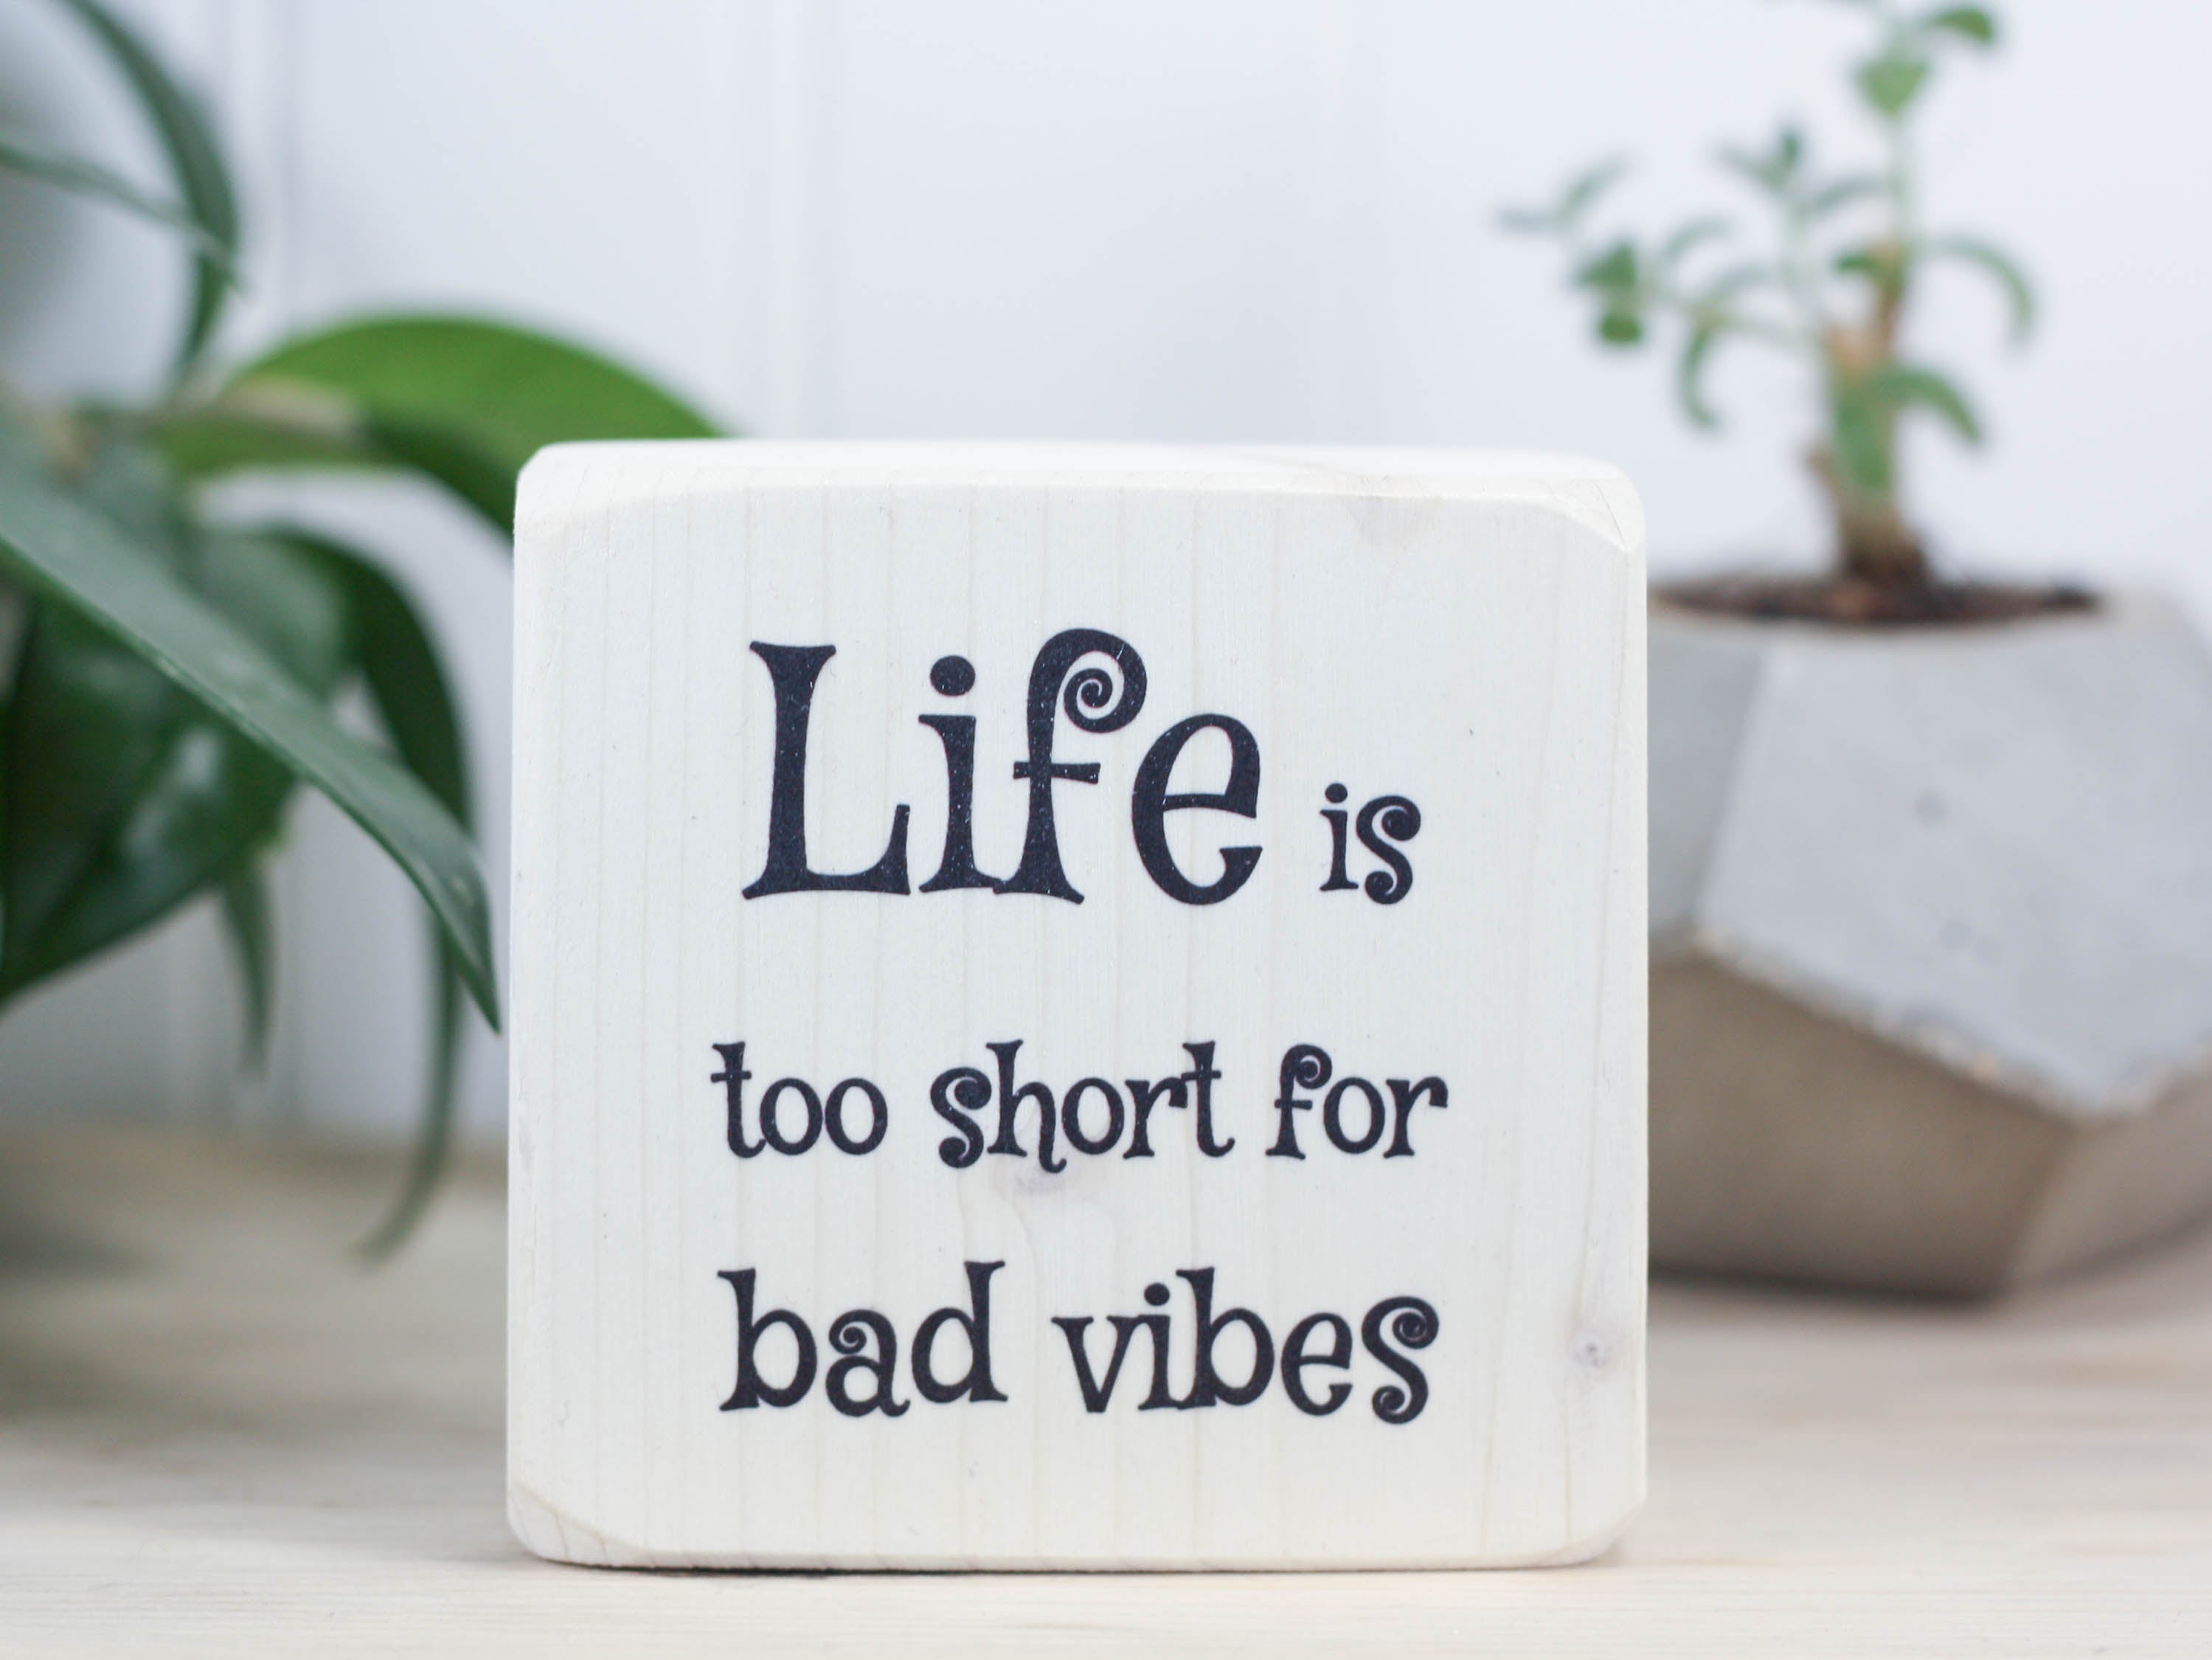 Mini wood sign in whitewash with the saying "Life is too short for bad vibes".